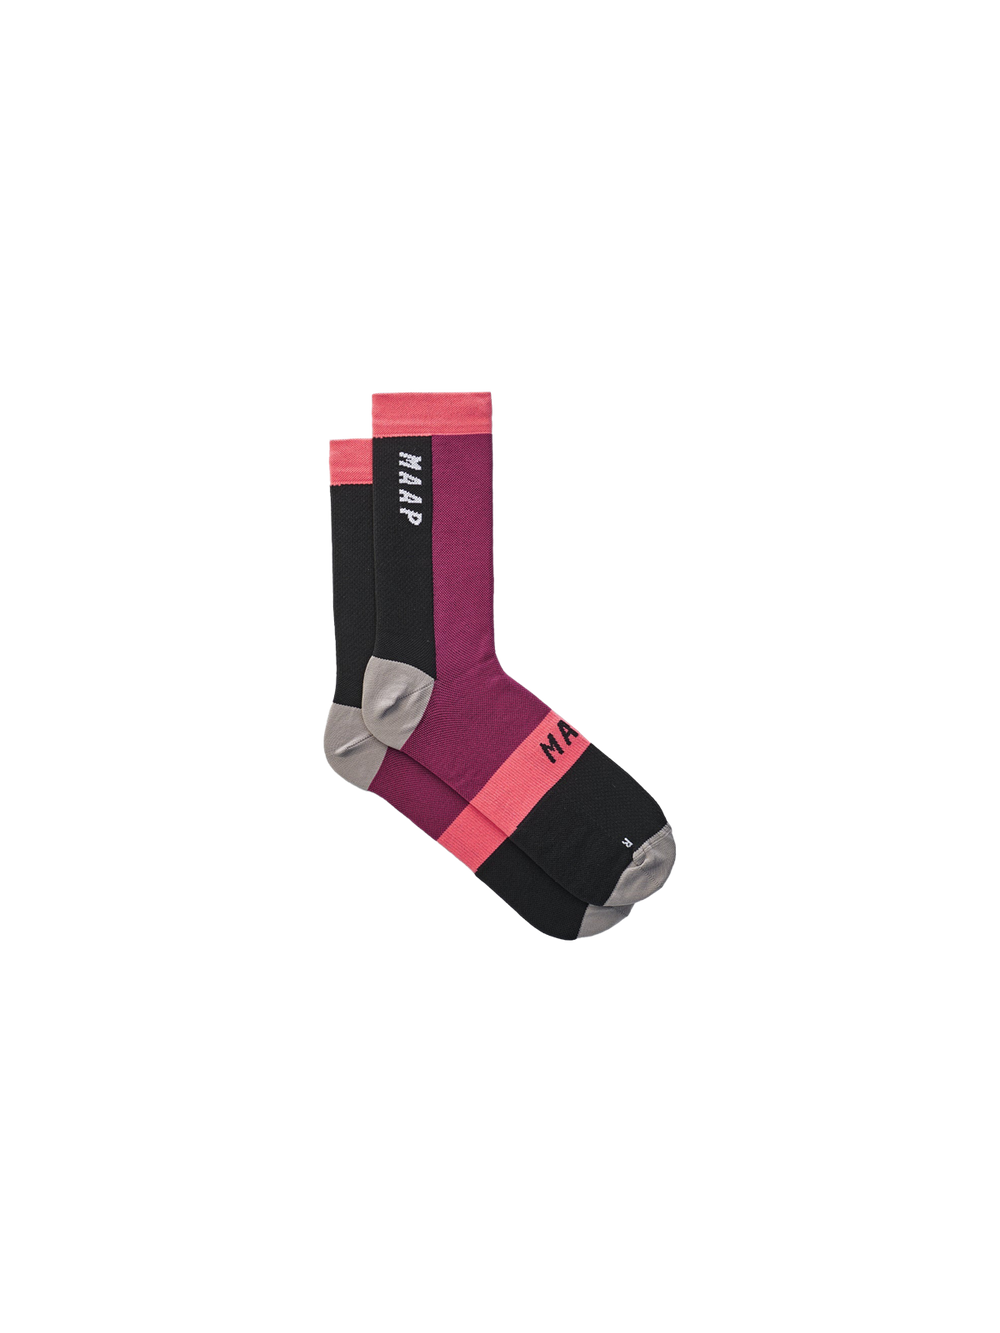 Product Image for League Sock